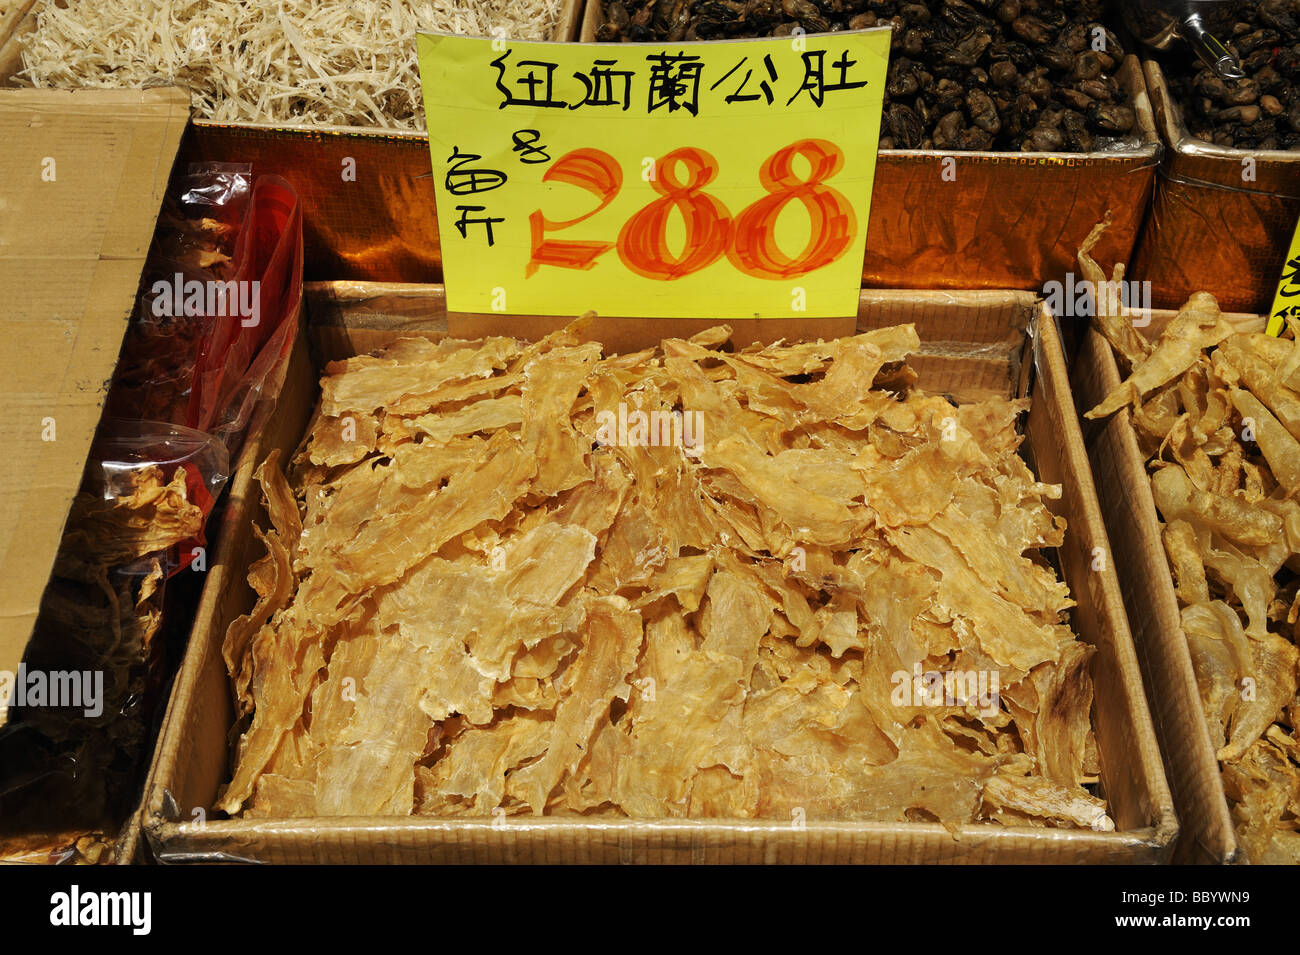 Hong Kong, Dried fish and other marine products in Sheung Wan just west of Central Hong Kong. Stock Photo